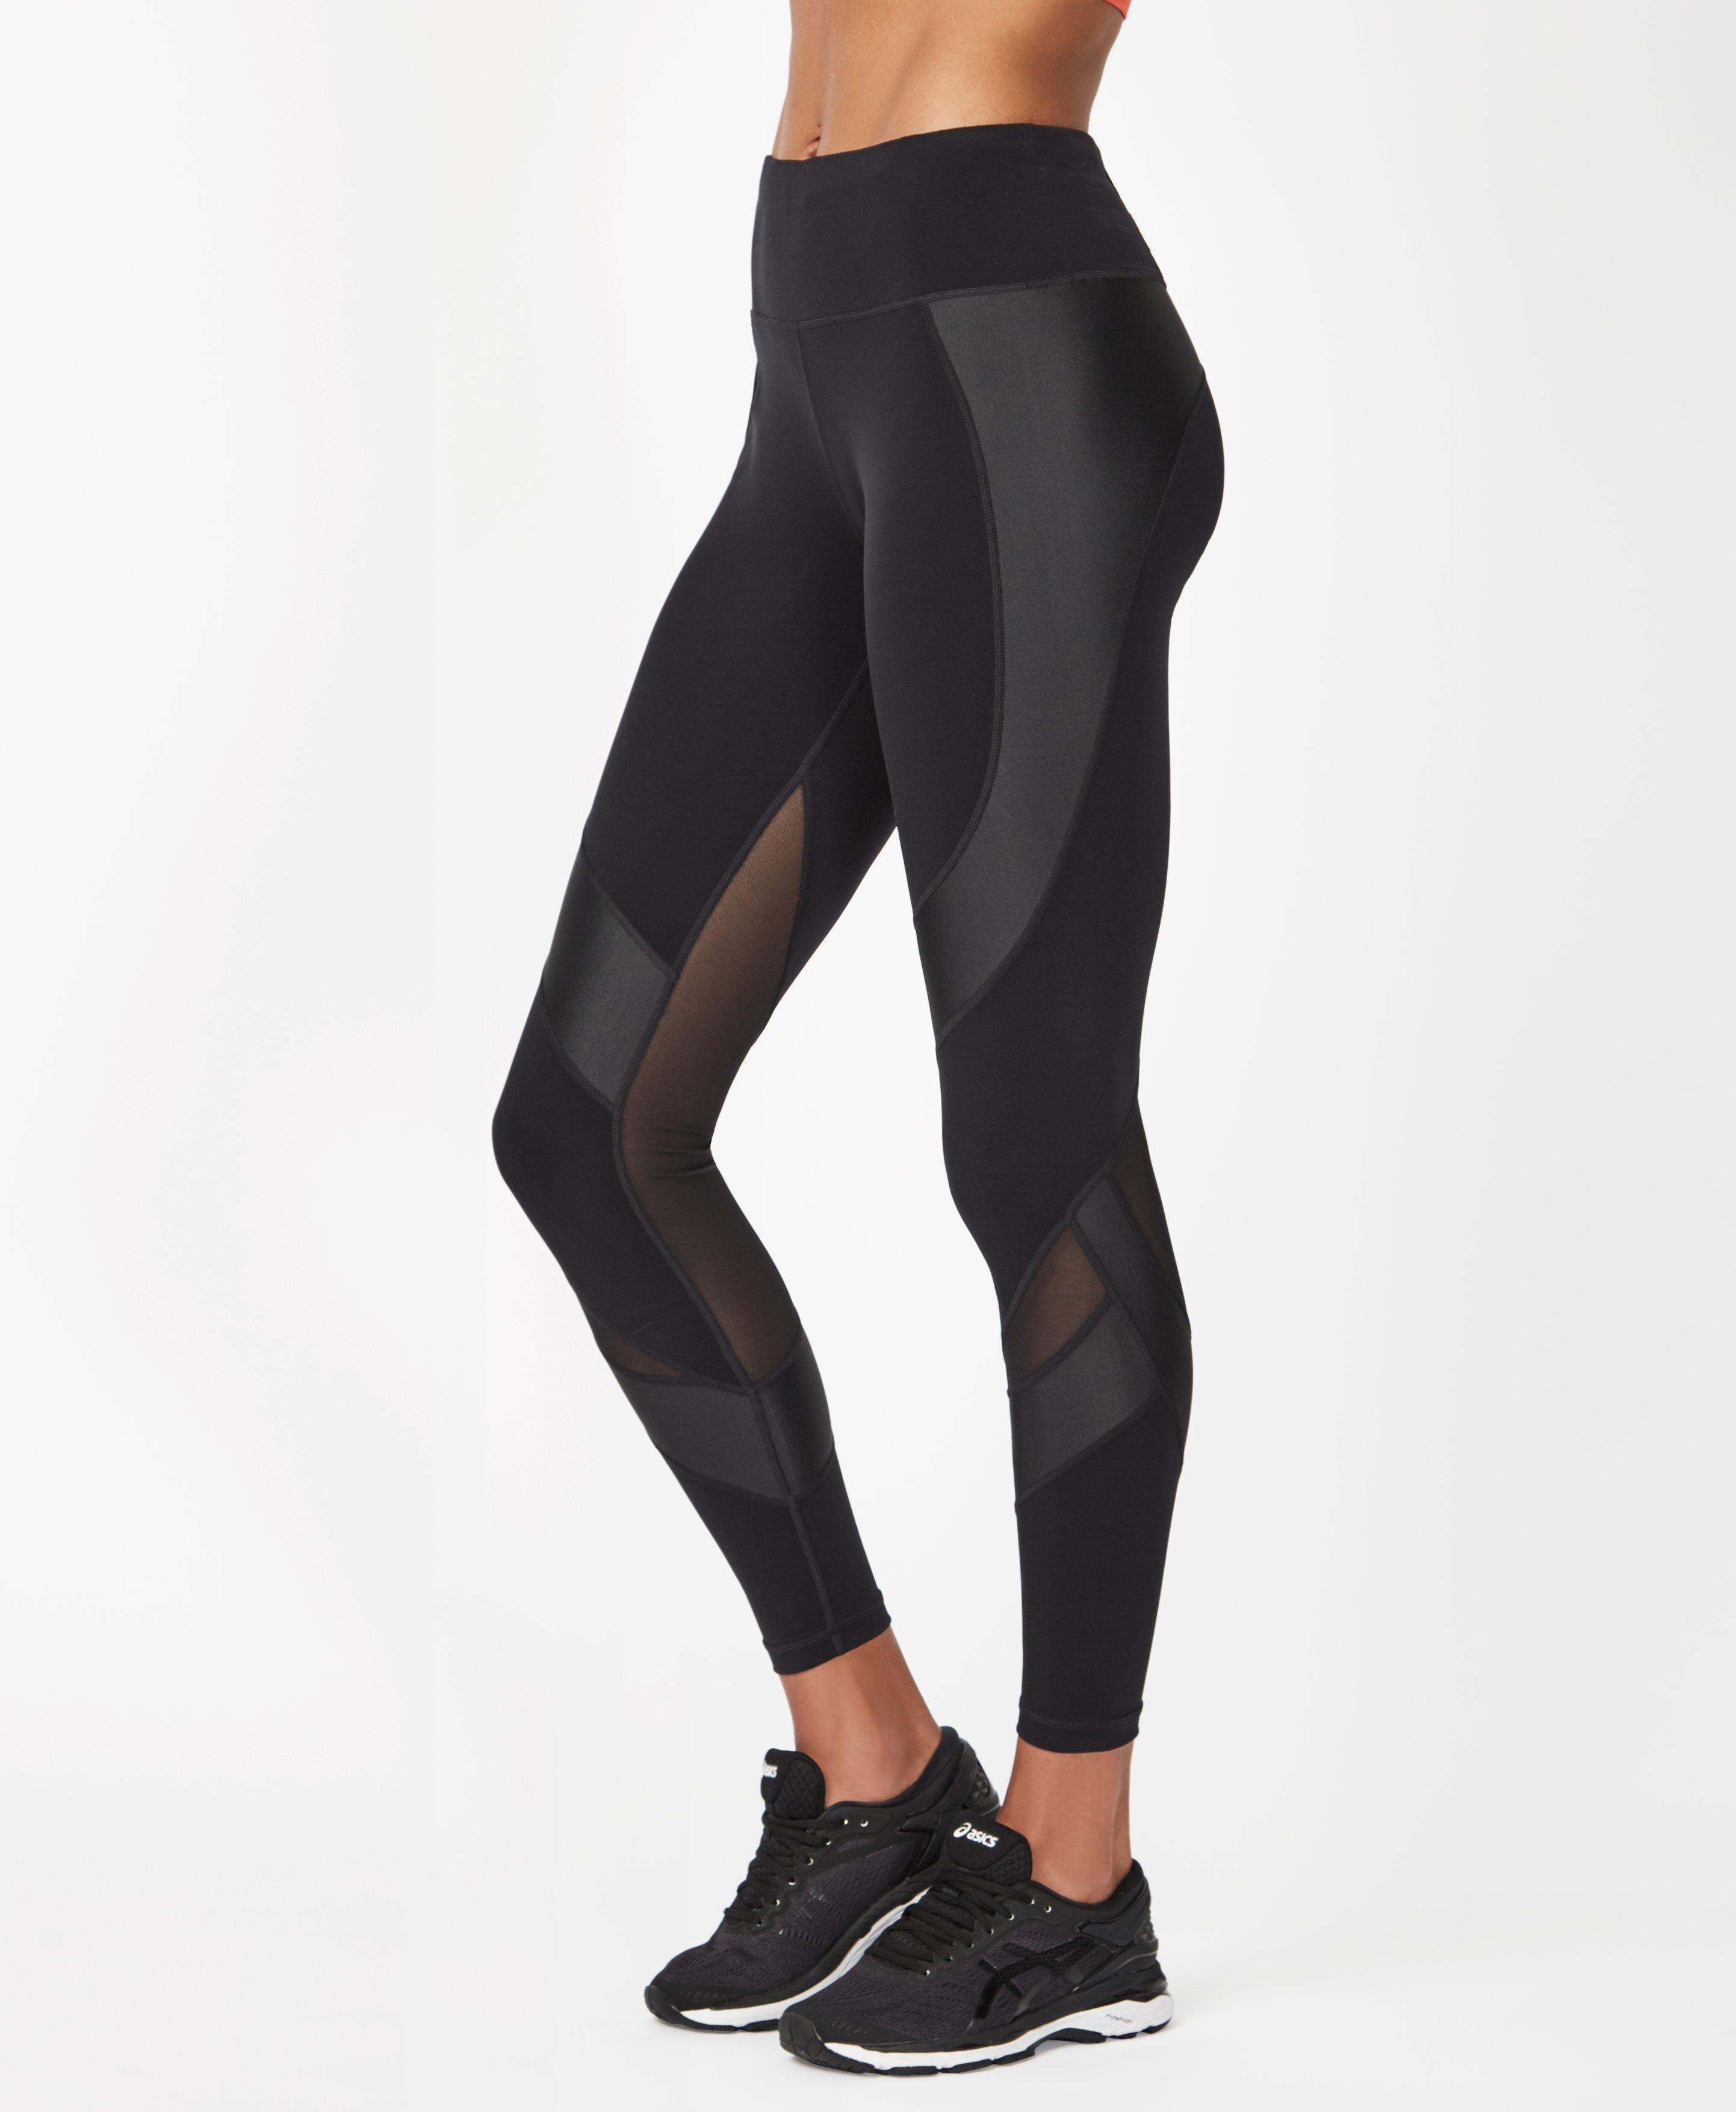 Sweaty Betty Synthetic Power Mesh 7/8 Workout Leggings in Black - Save ...